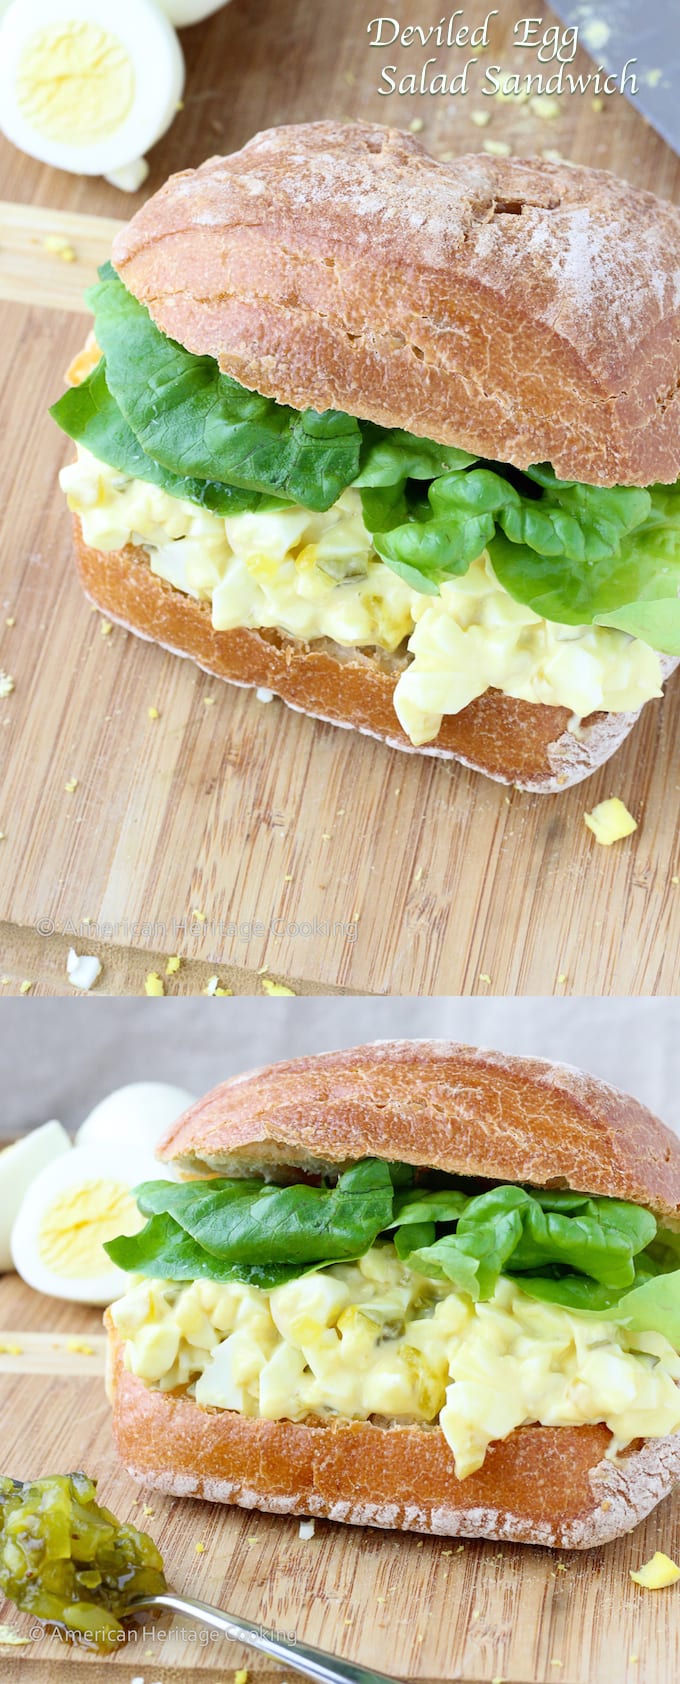 Egg salad sandwiches in ciabatta rolls with a spoonful of sweet relish.